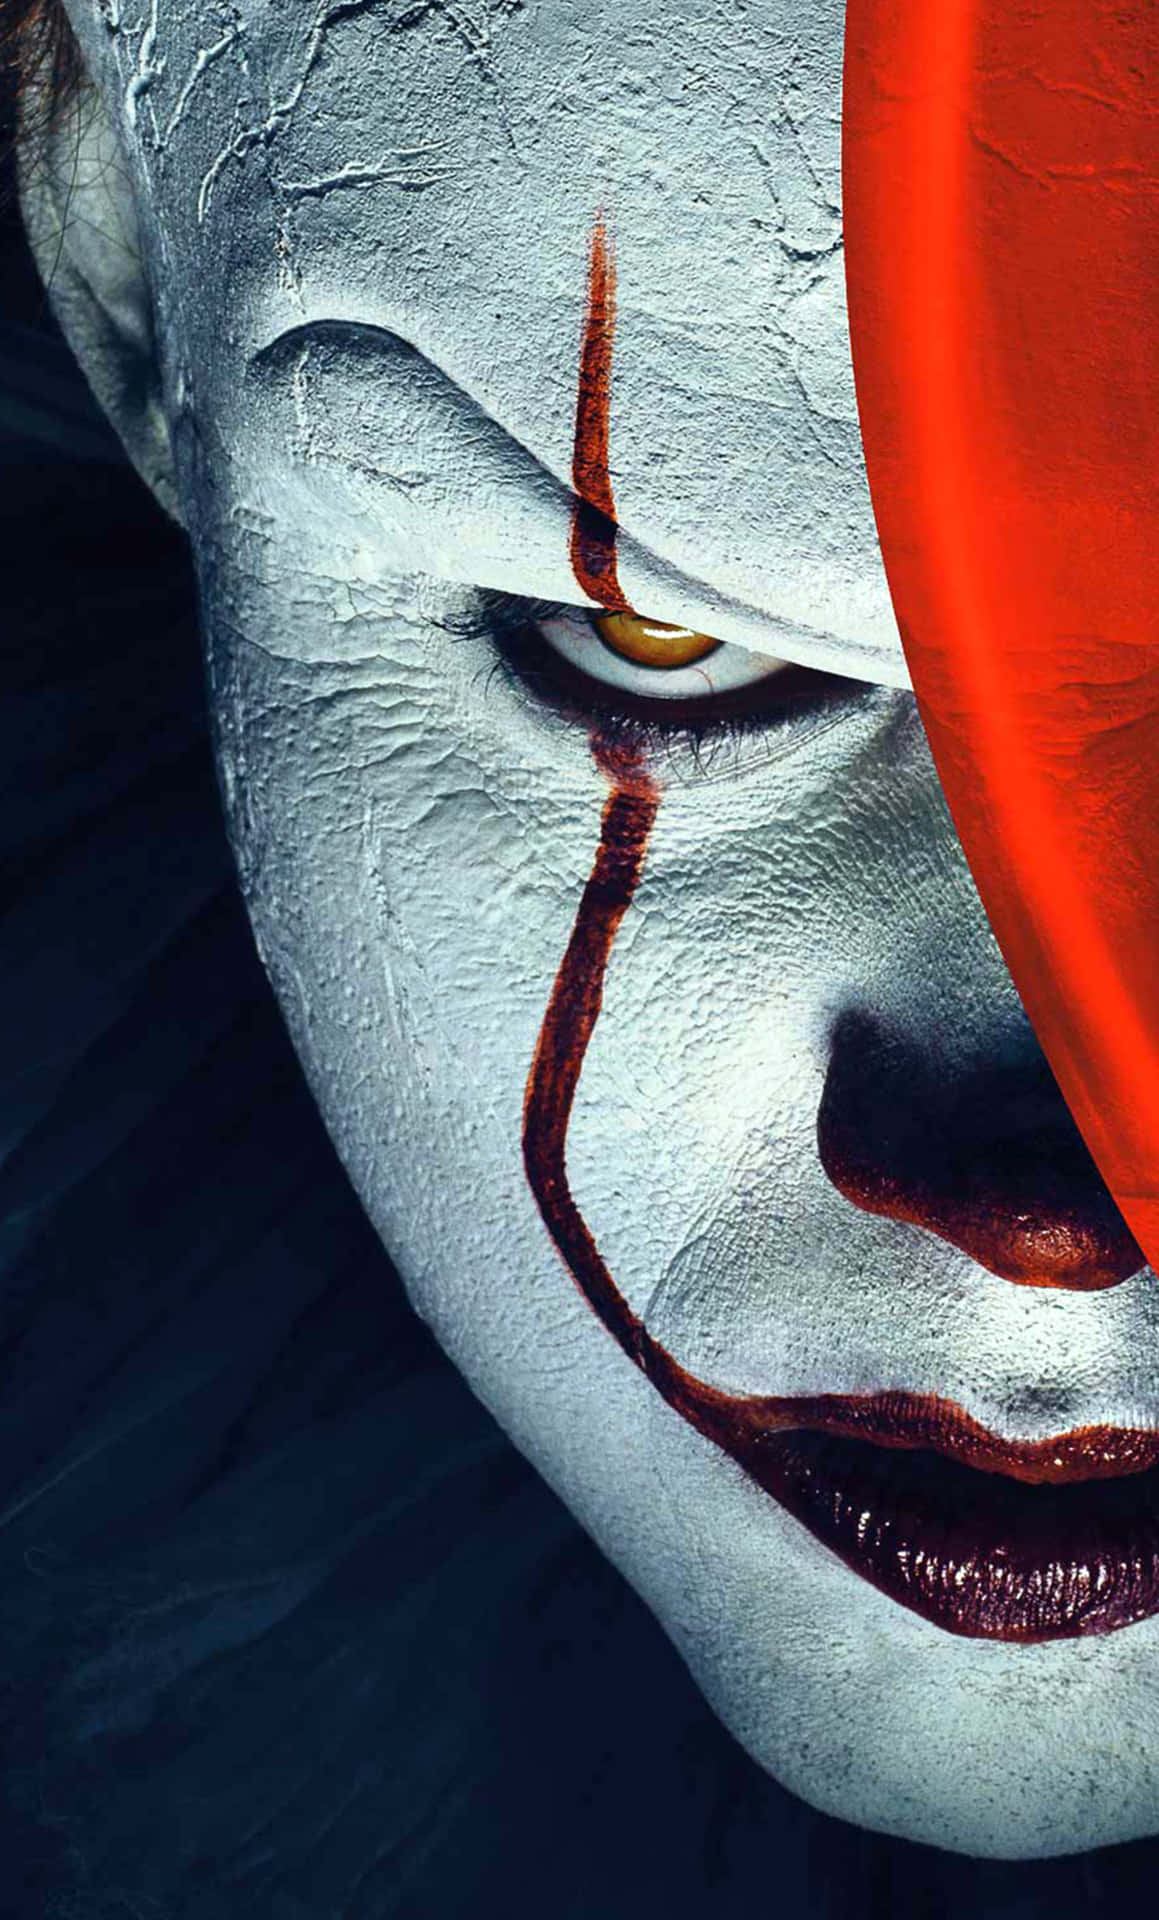 The terrifying clown Pennywise has returned in IT 2017 Wallpaper